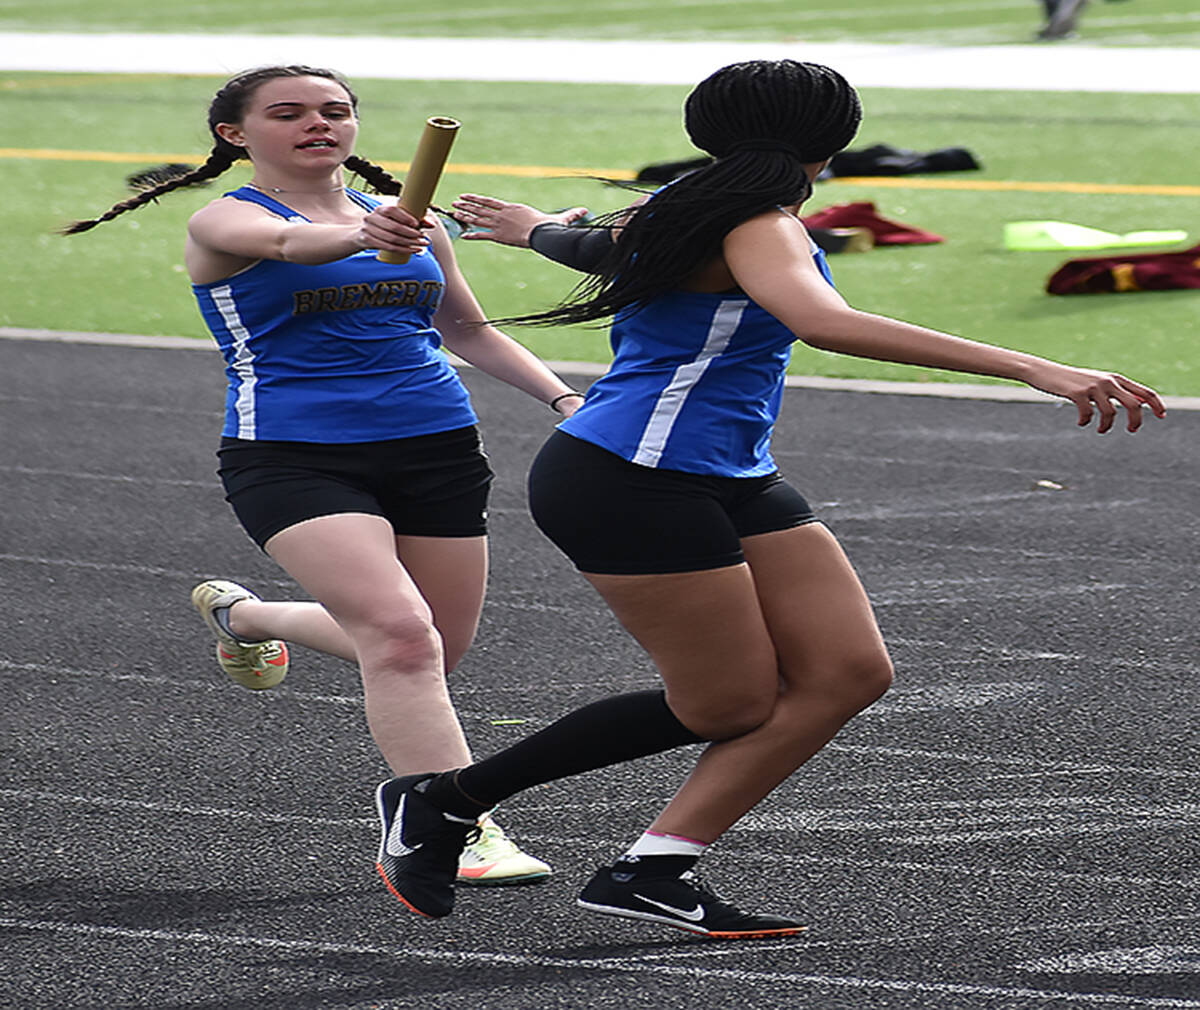 Bremerton’s girls team finished 15th with 23 points.